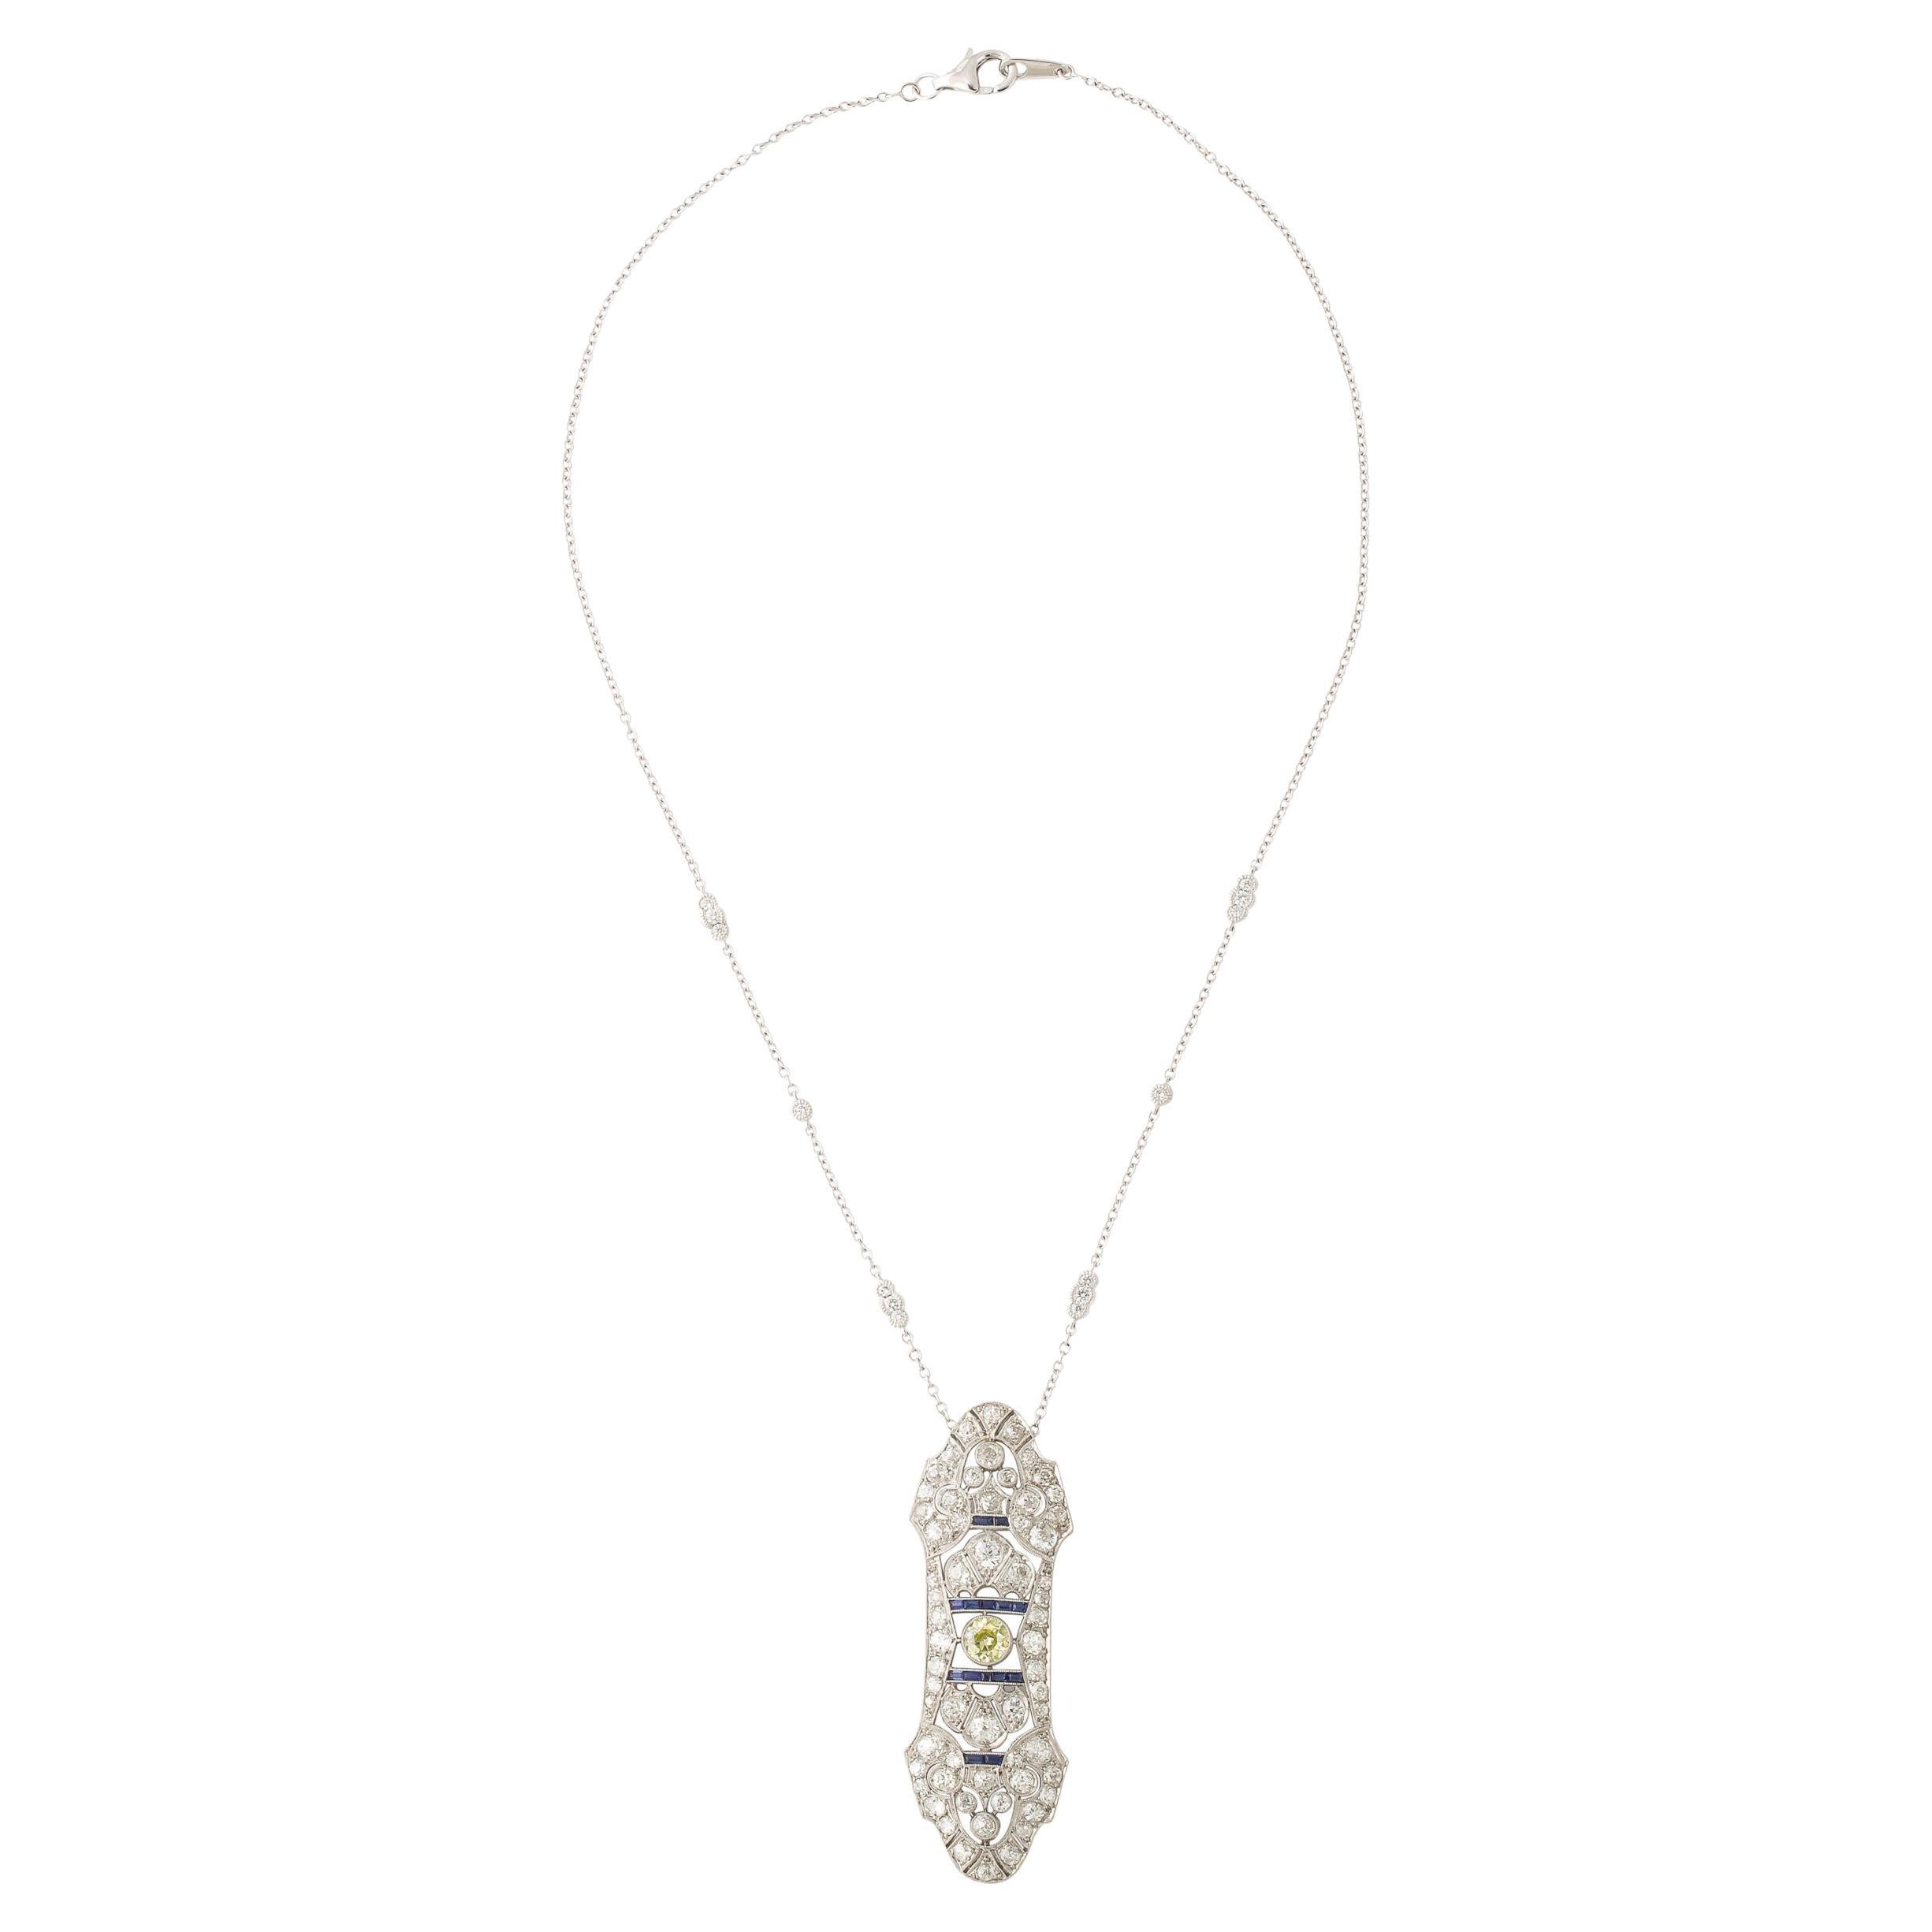 This beautiful Art Deco Pendant Necklace was created in America Circa 1925. Featuring a Shield form silhouette, the line work beautifully balances gentle curves and angular moments reminiscent of the framing of stained glass windows. A beautiful